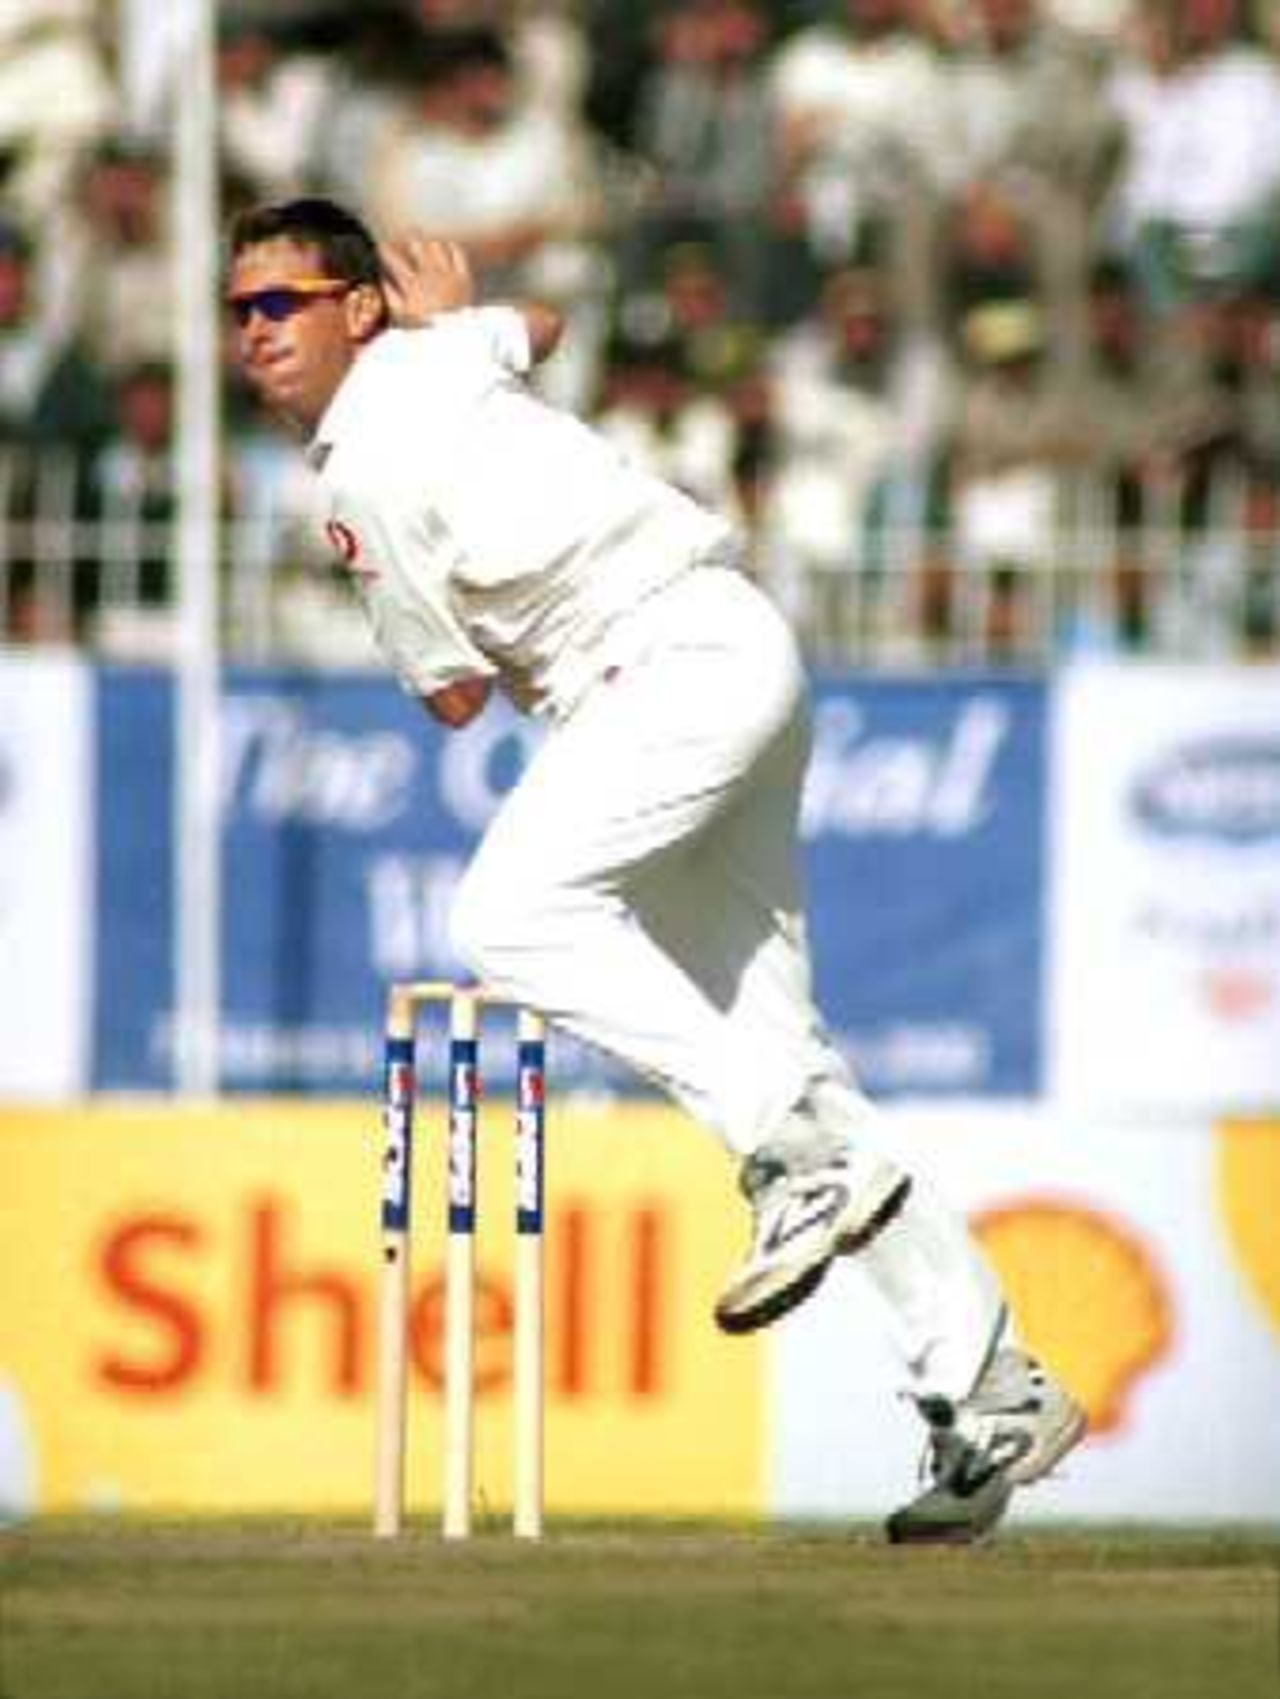 Giles in his bowling stride, Day 1, 2nd Test Match, Pakistan v England at Faisalabad, 29 Nov-3 Dec 2000.